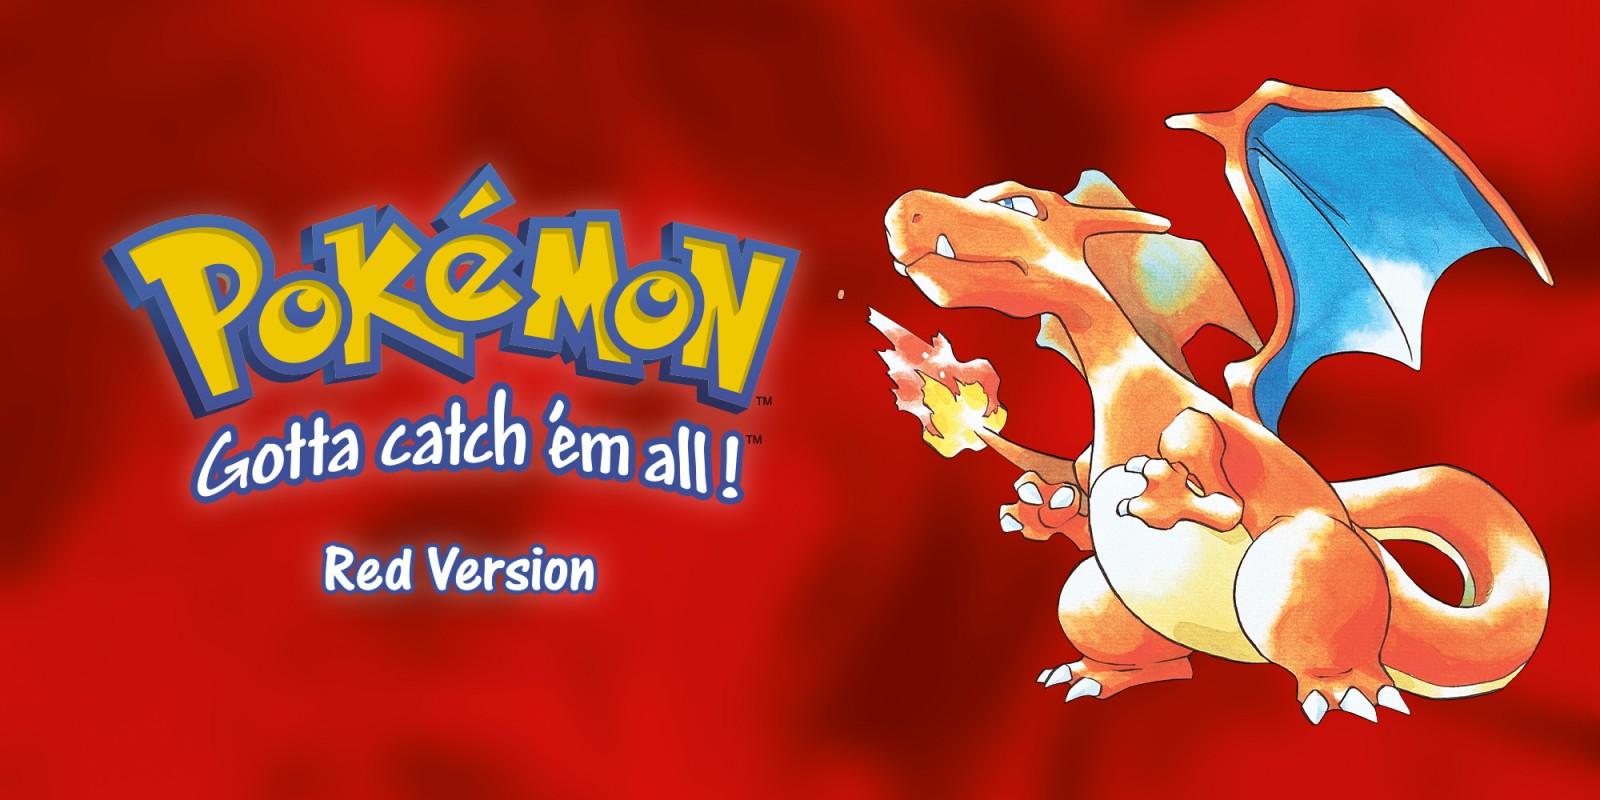 RUMOR: Updated Switch Online video might hint at classic Pokémon games  incoming